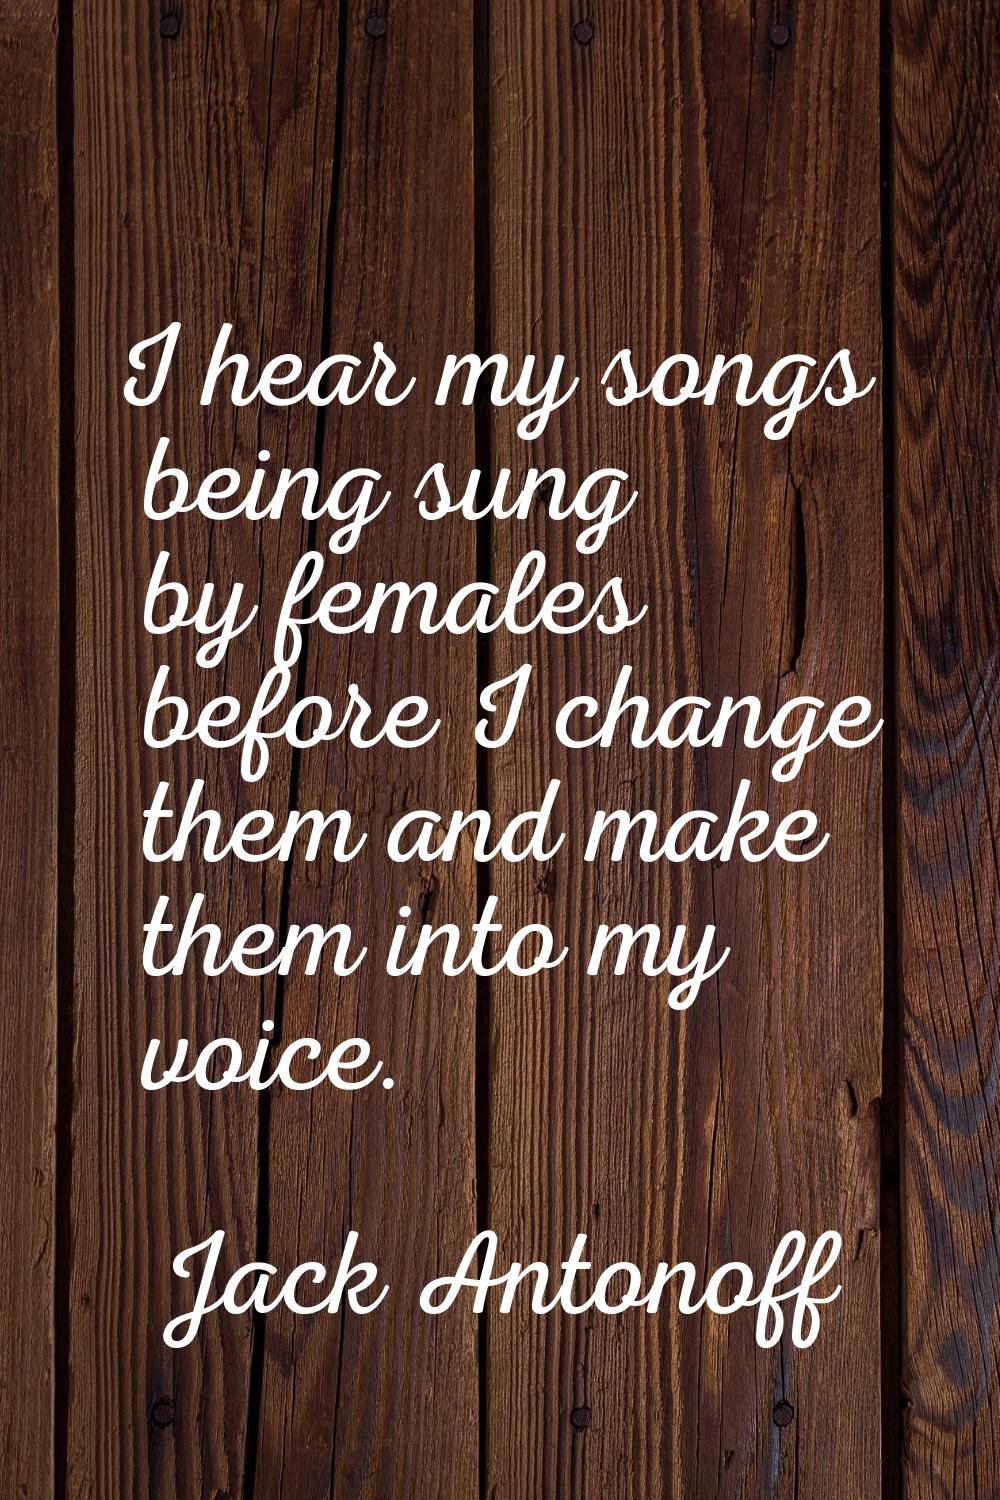 I hear my songs being sung by females before I change them and make them into my voice.